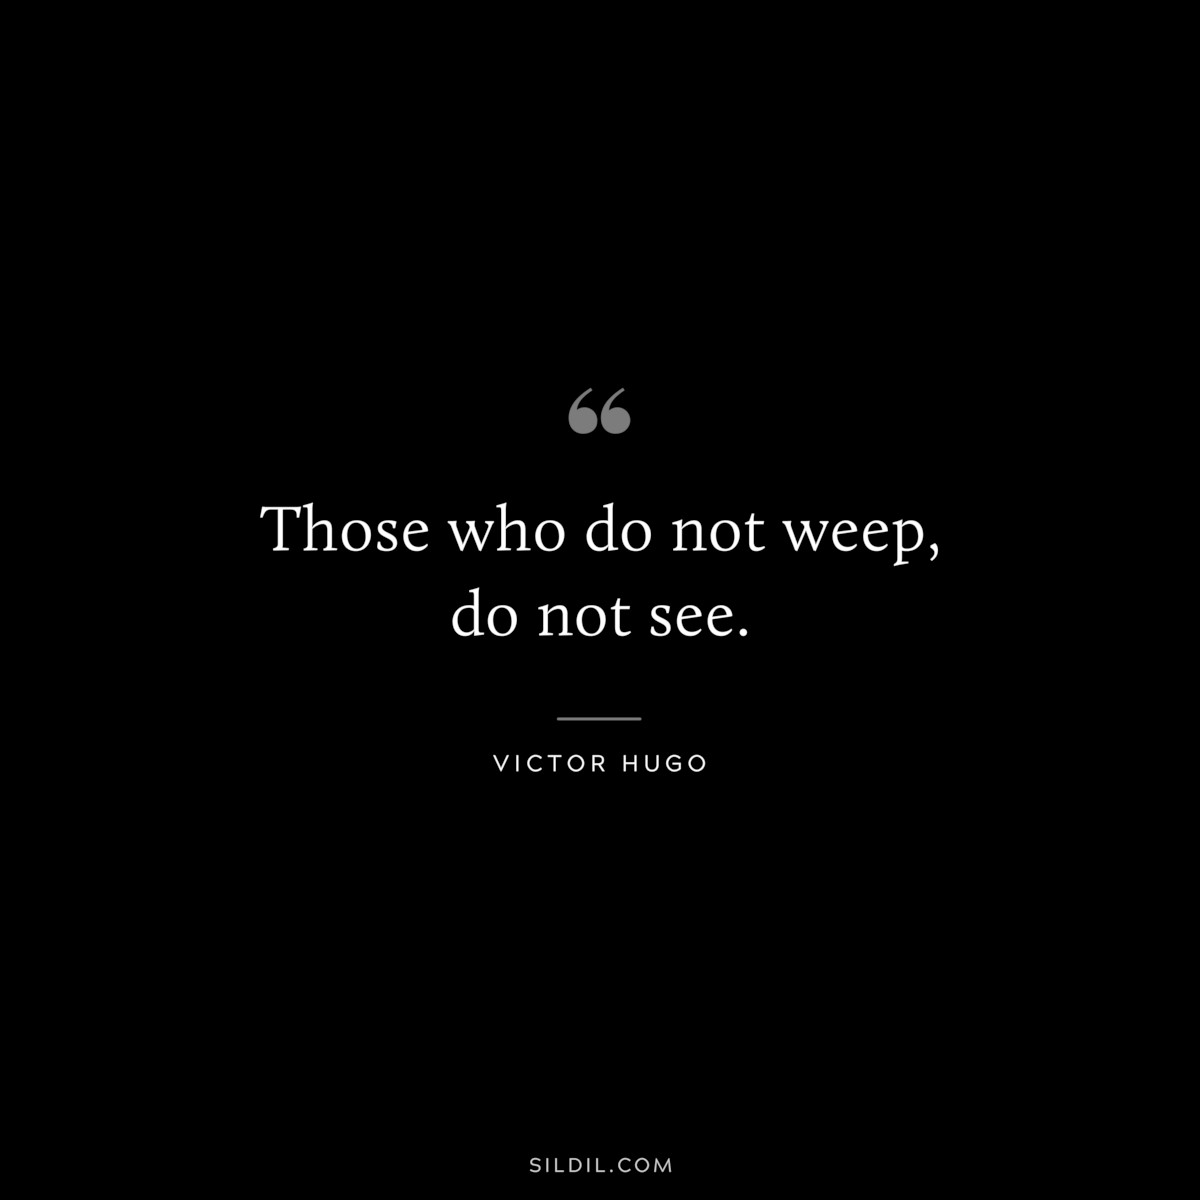 Those who do not weep, do not see.― Victor Hugo